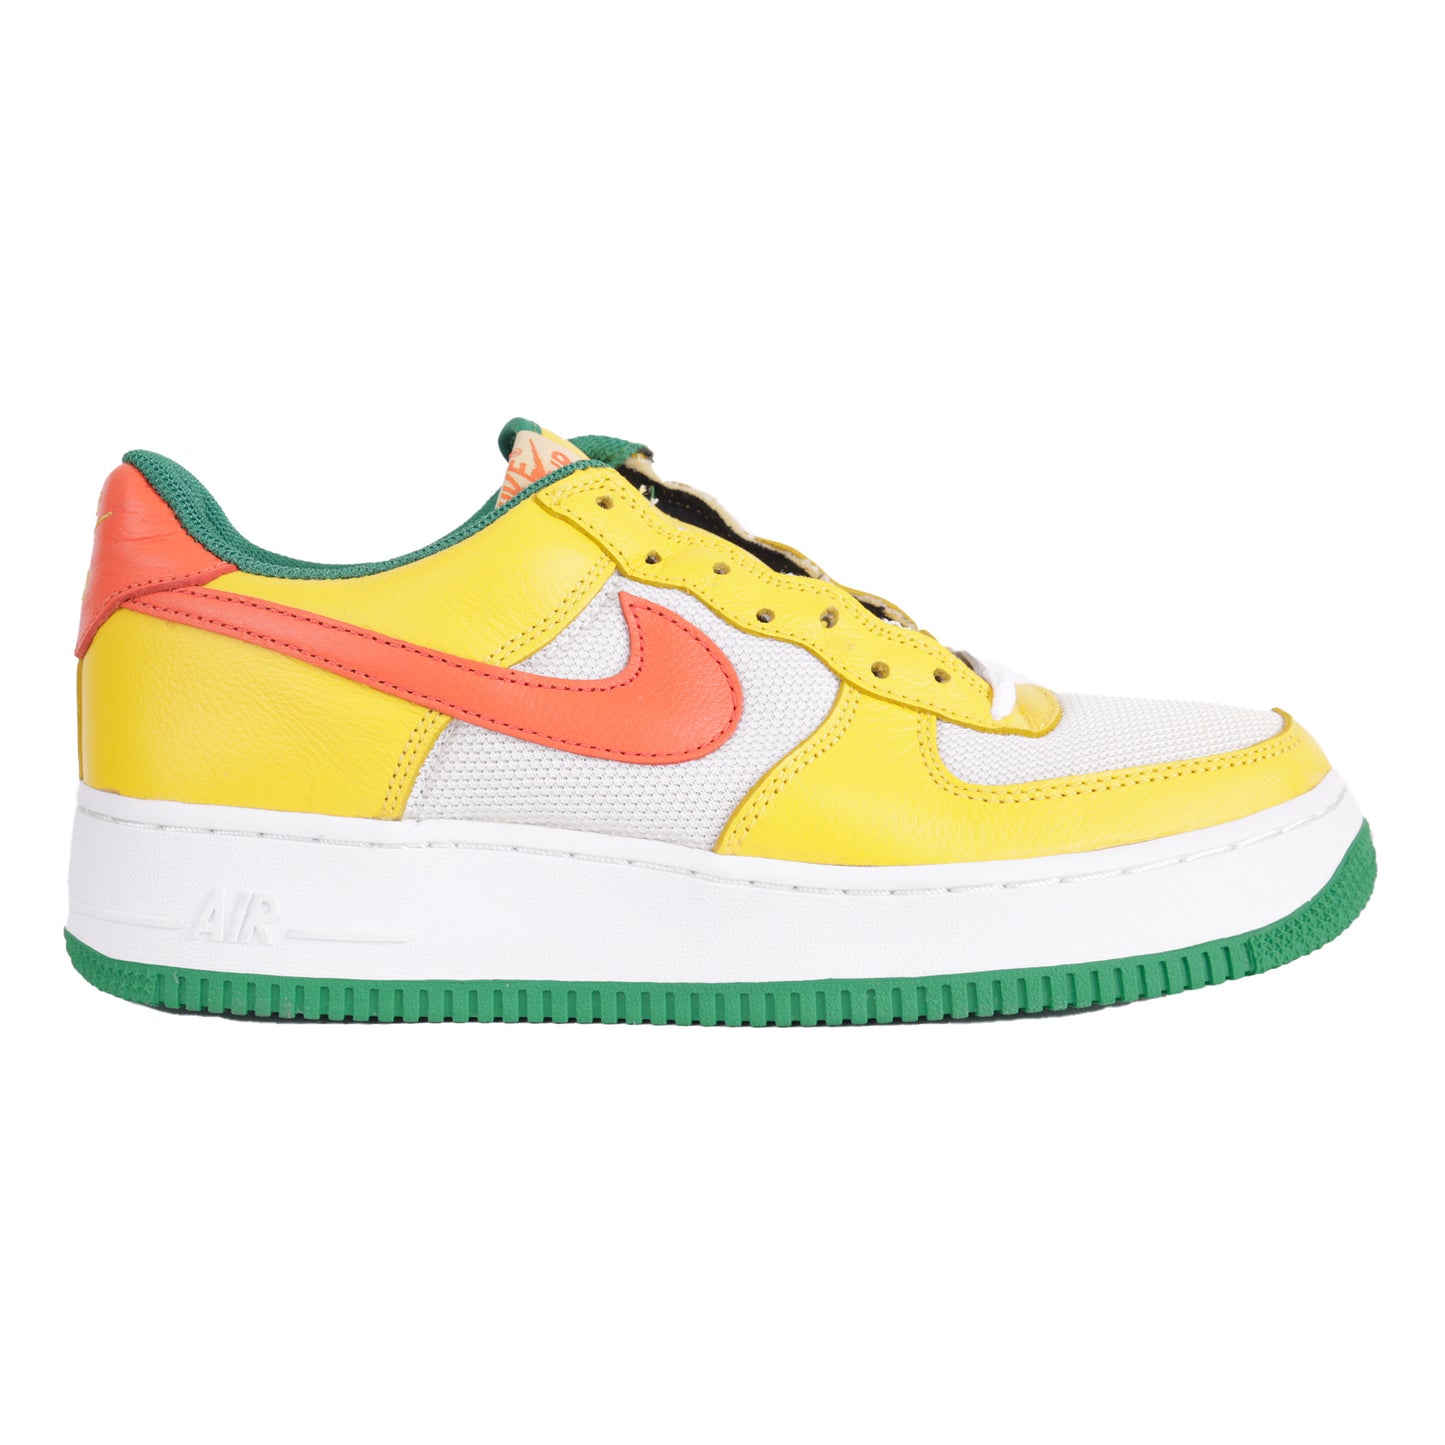 Air Force 1 Low Notting Hill Carnival In Yellow Zest/orange Flash-white-green. Size: 9